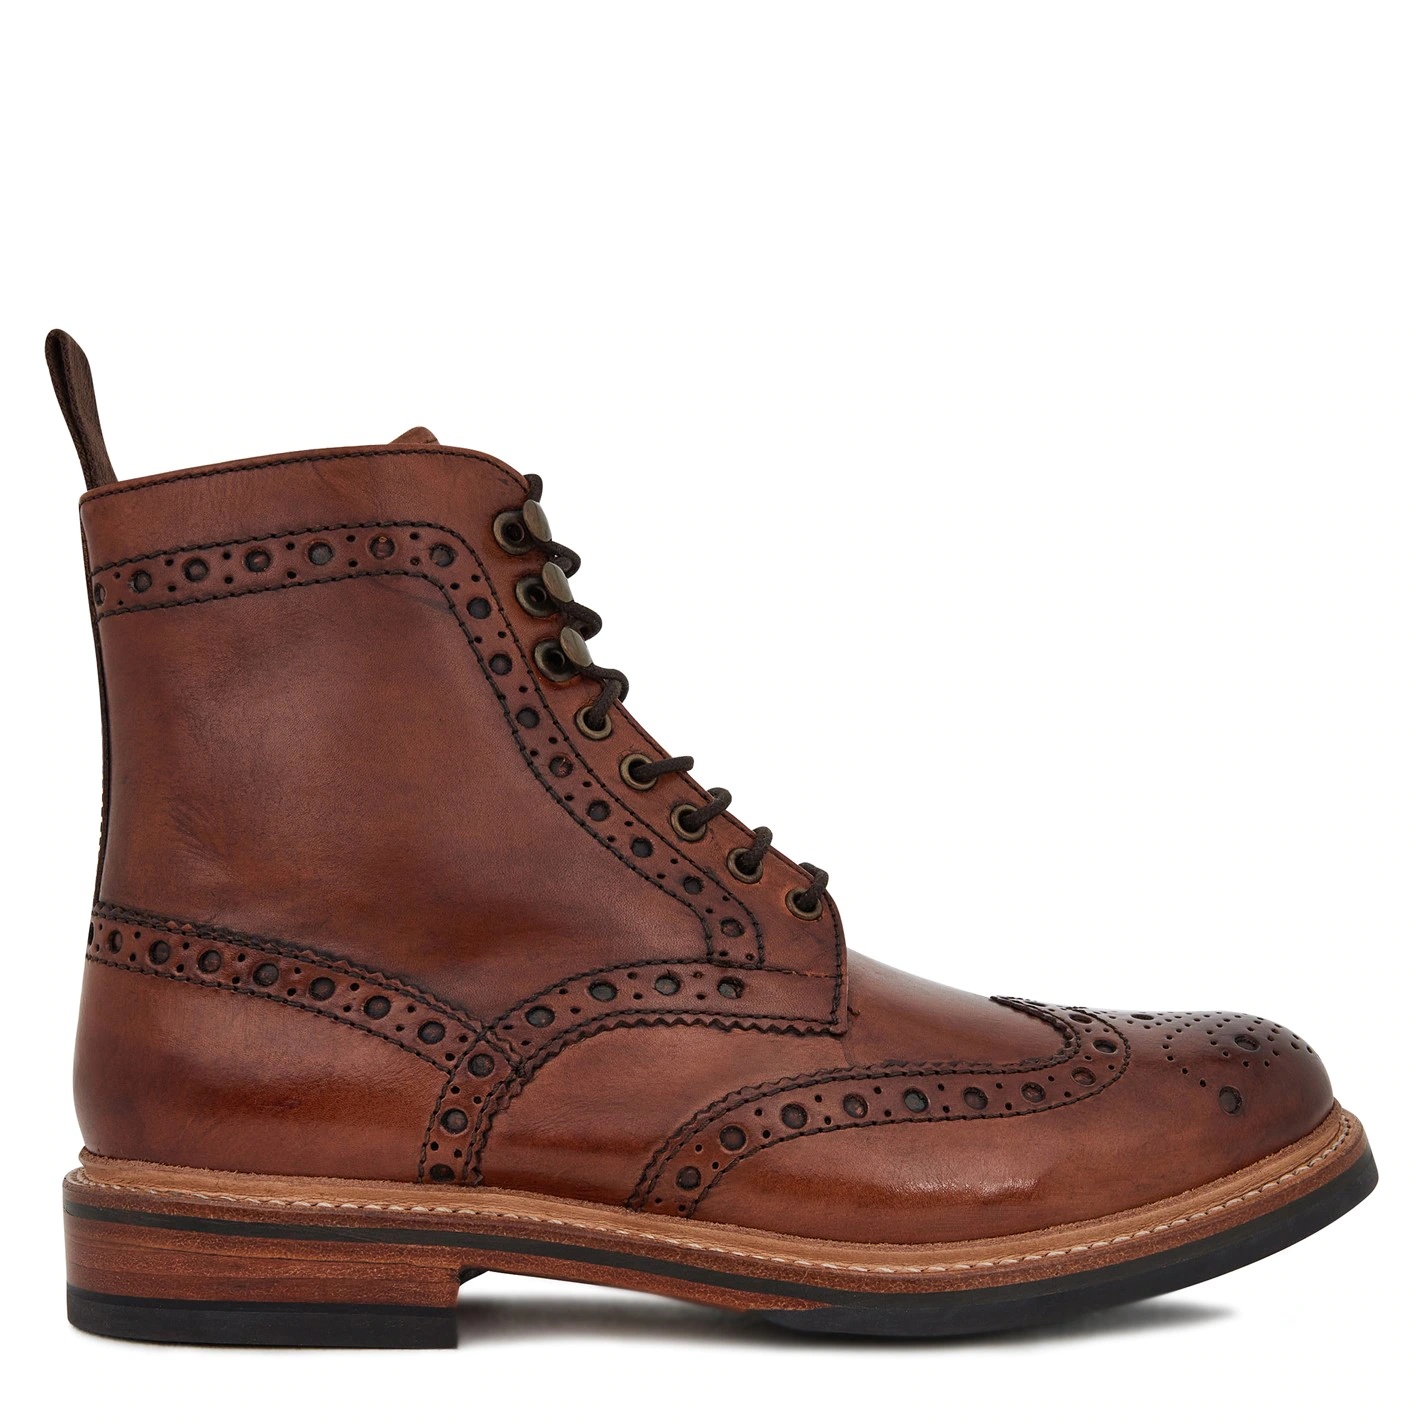 FRED BROGUE BOOT - 1